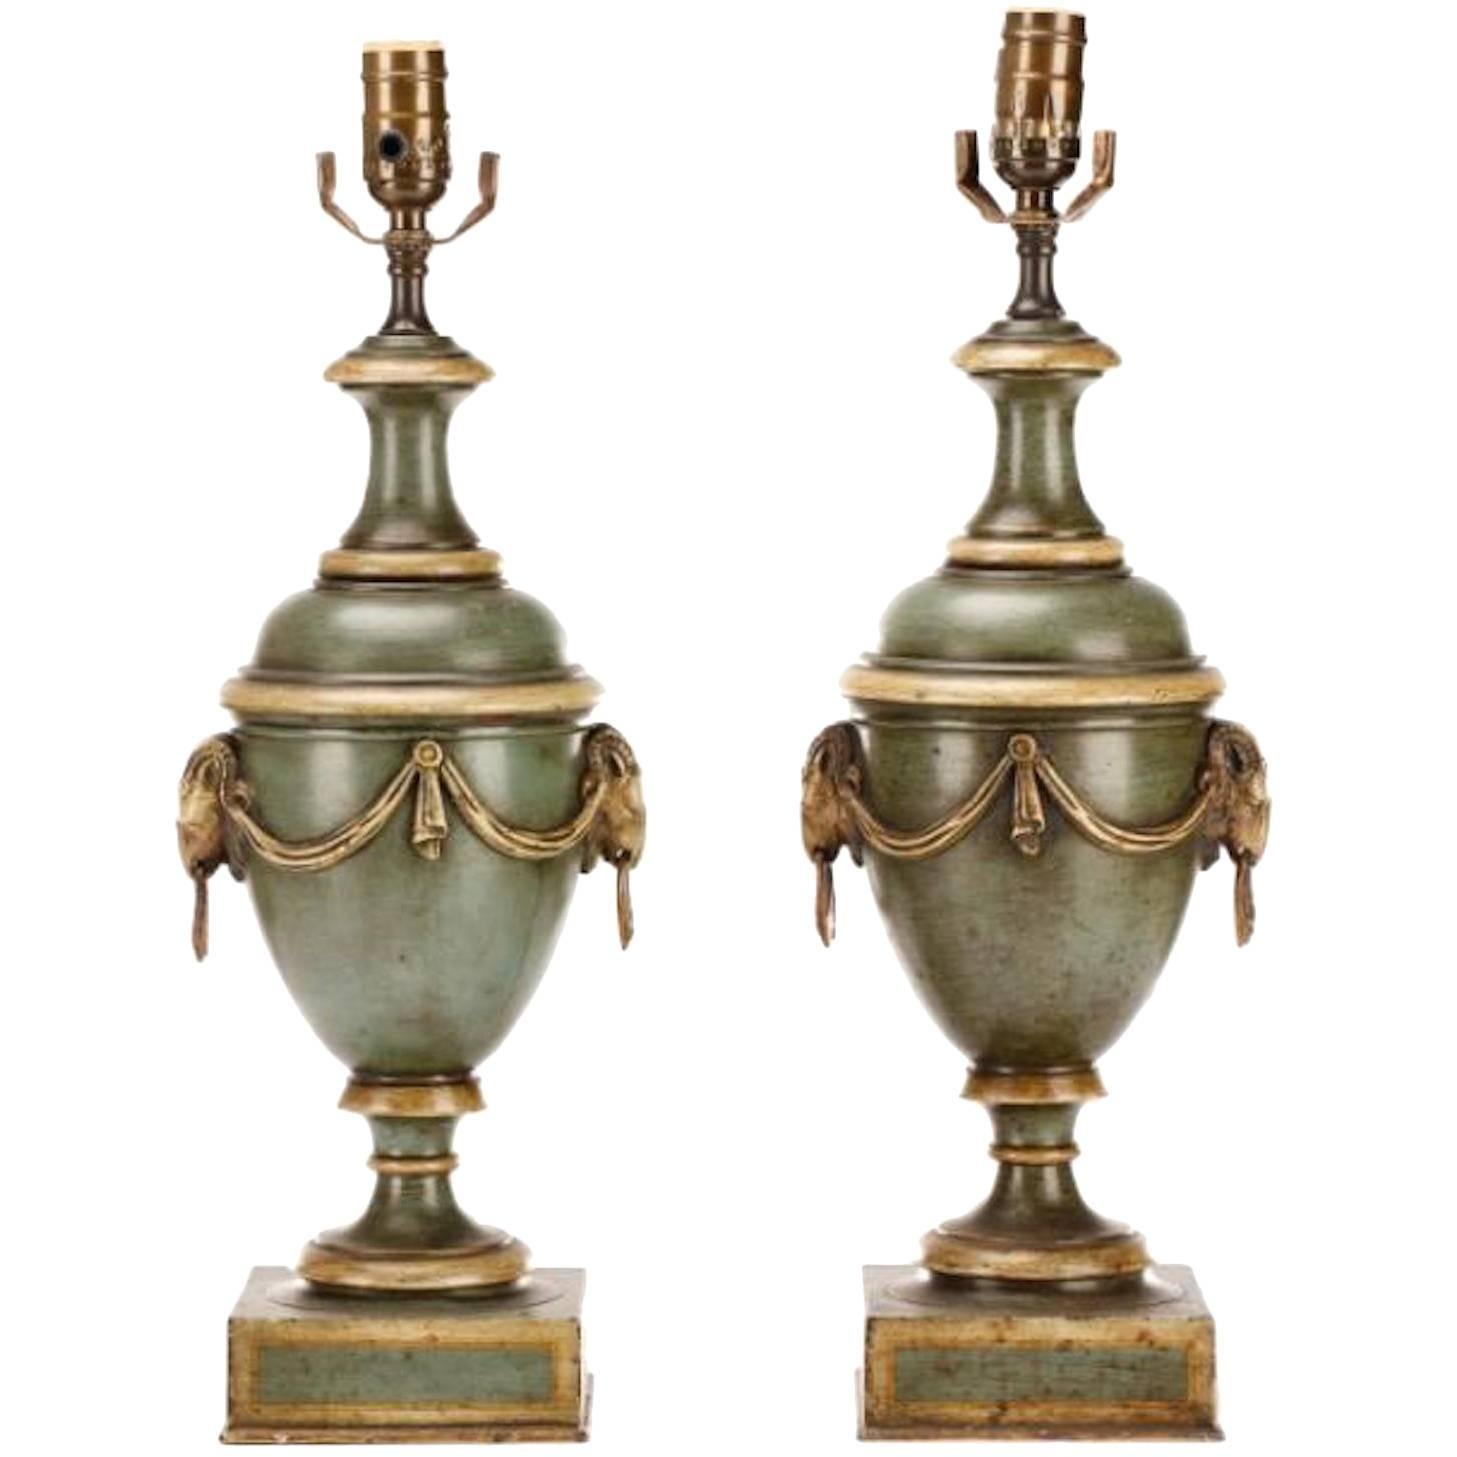 Pair of French Tole Neoclassic Urns